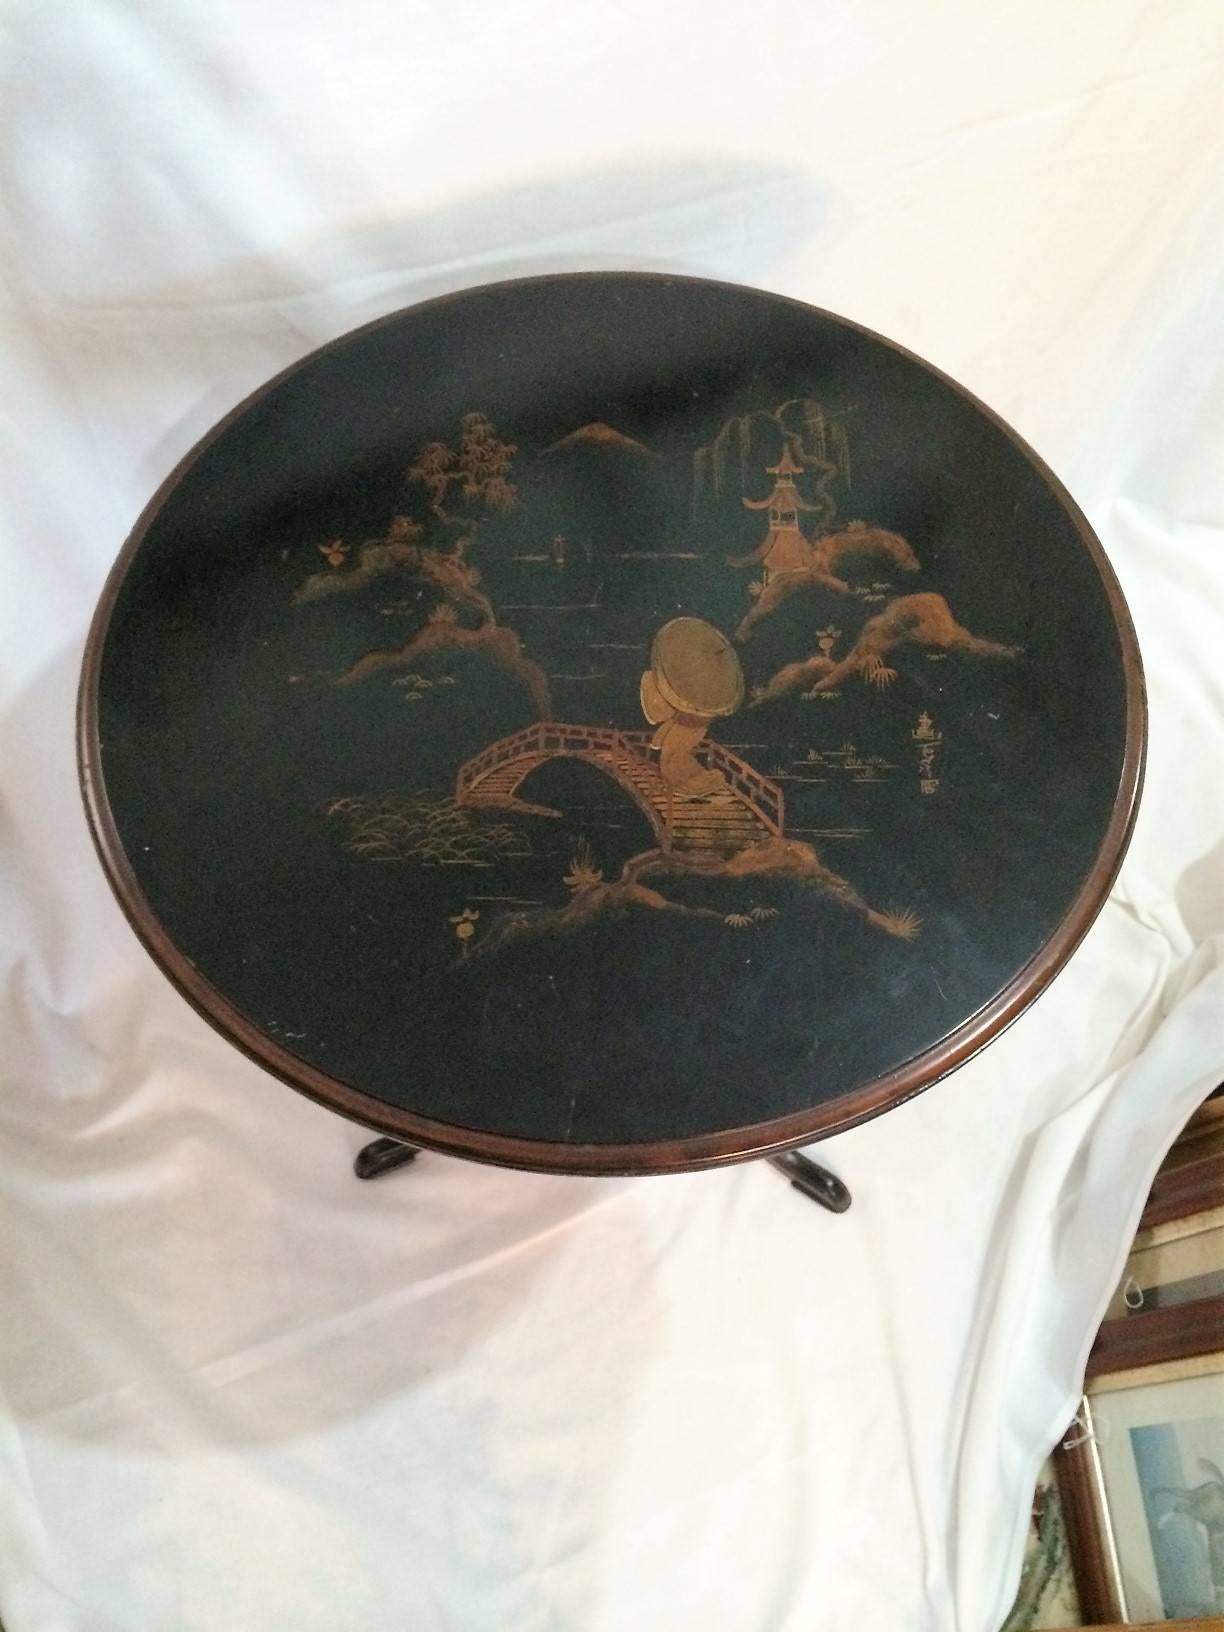 Beautiful Hand-Painted Round Black & Gold chinoiserie Table On Tripod Base. Simple Elegance.

This needs some love. The structure is sturdy...the top in antique condition. Some minor wear - not in structure...structure perfect.. Selling 